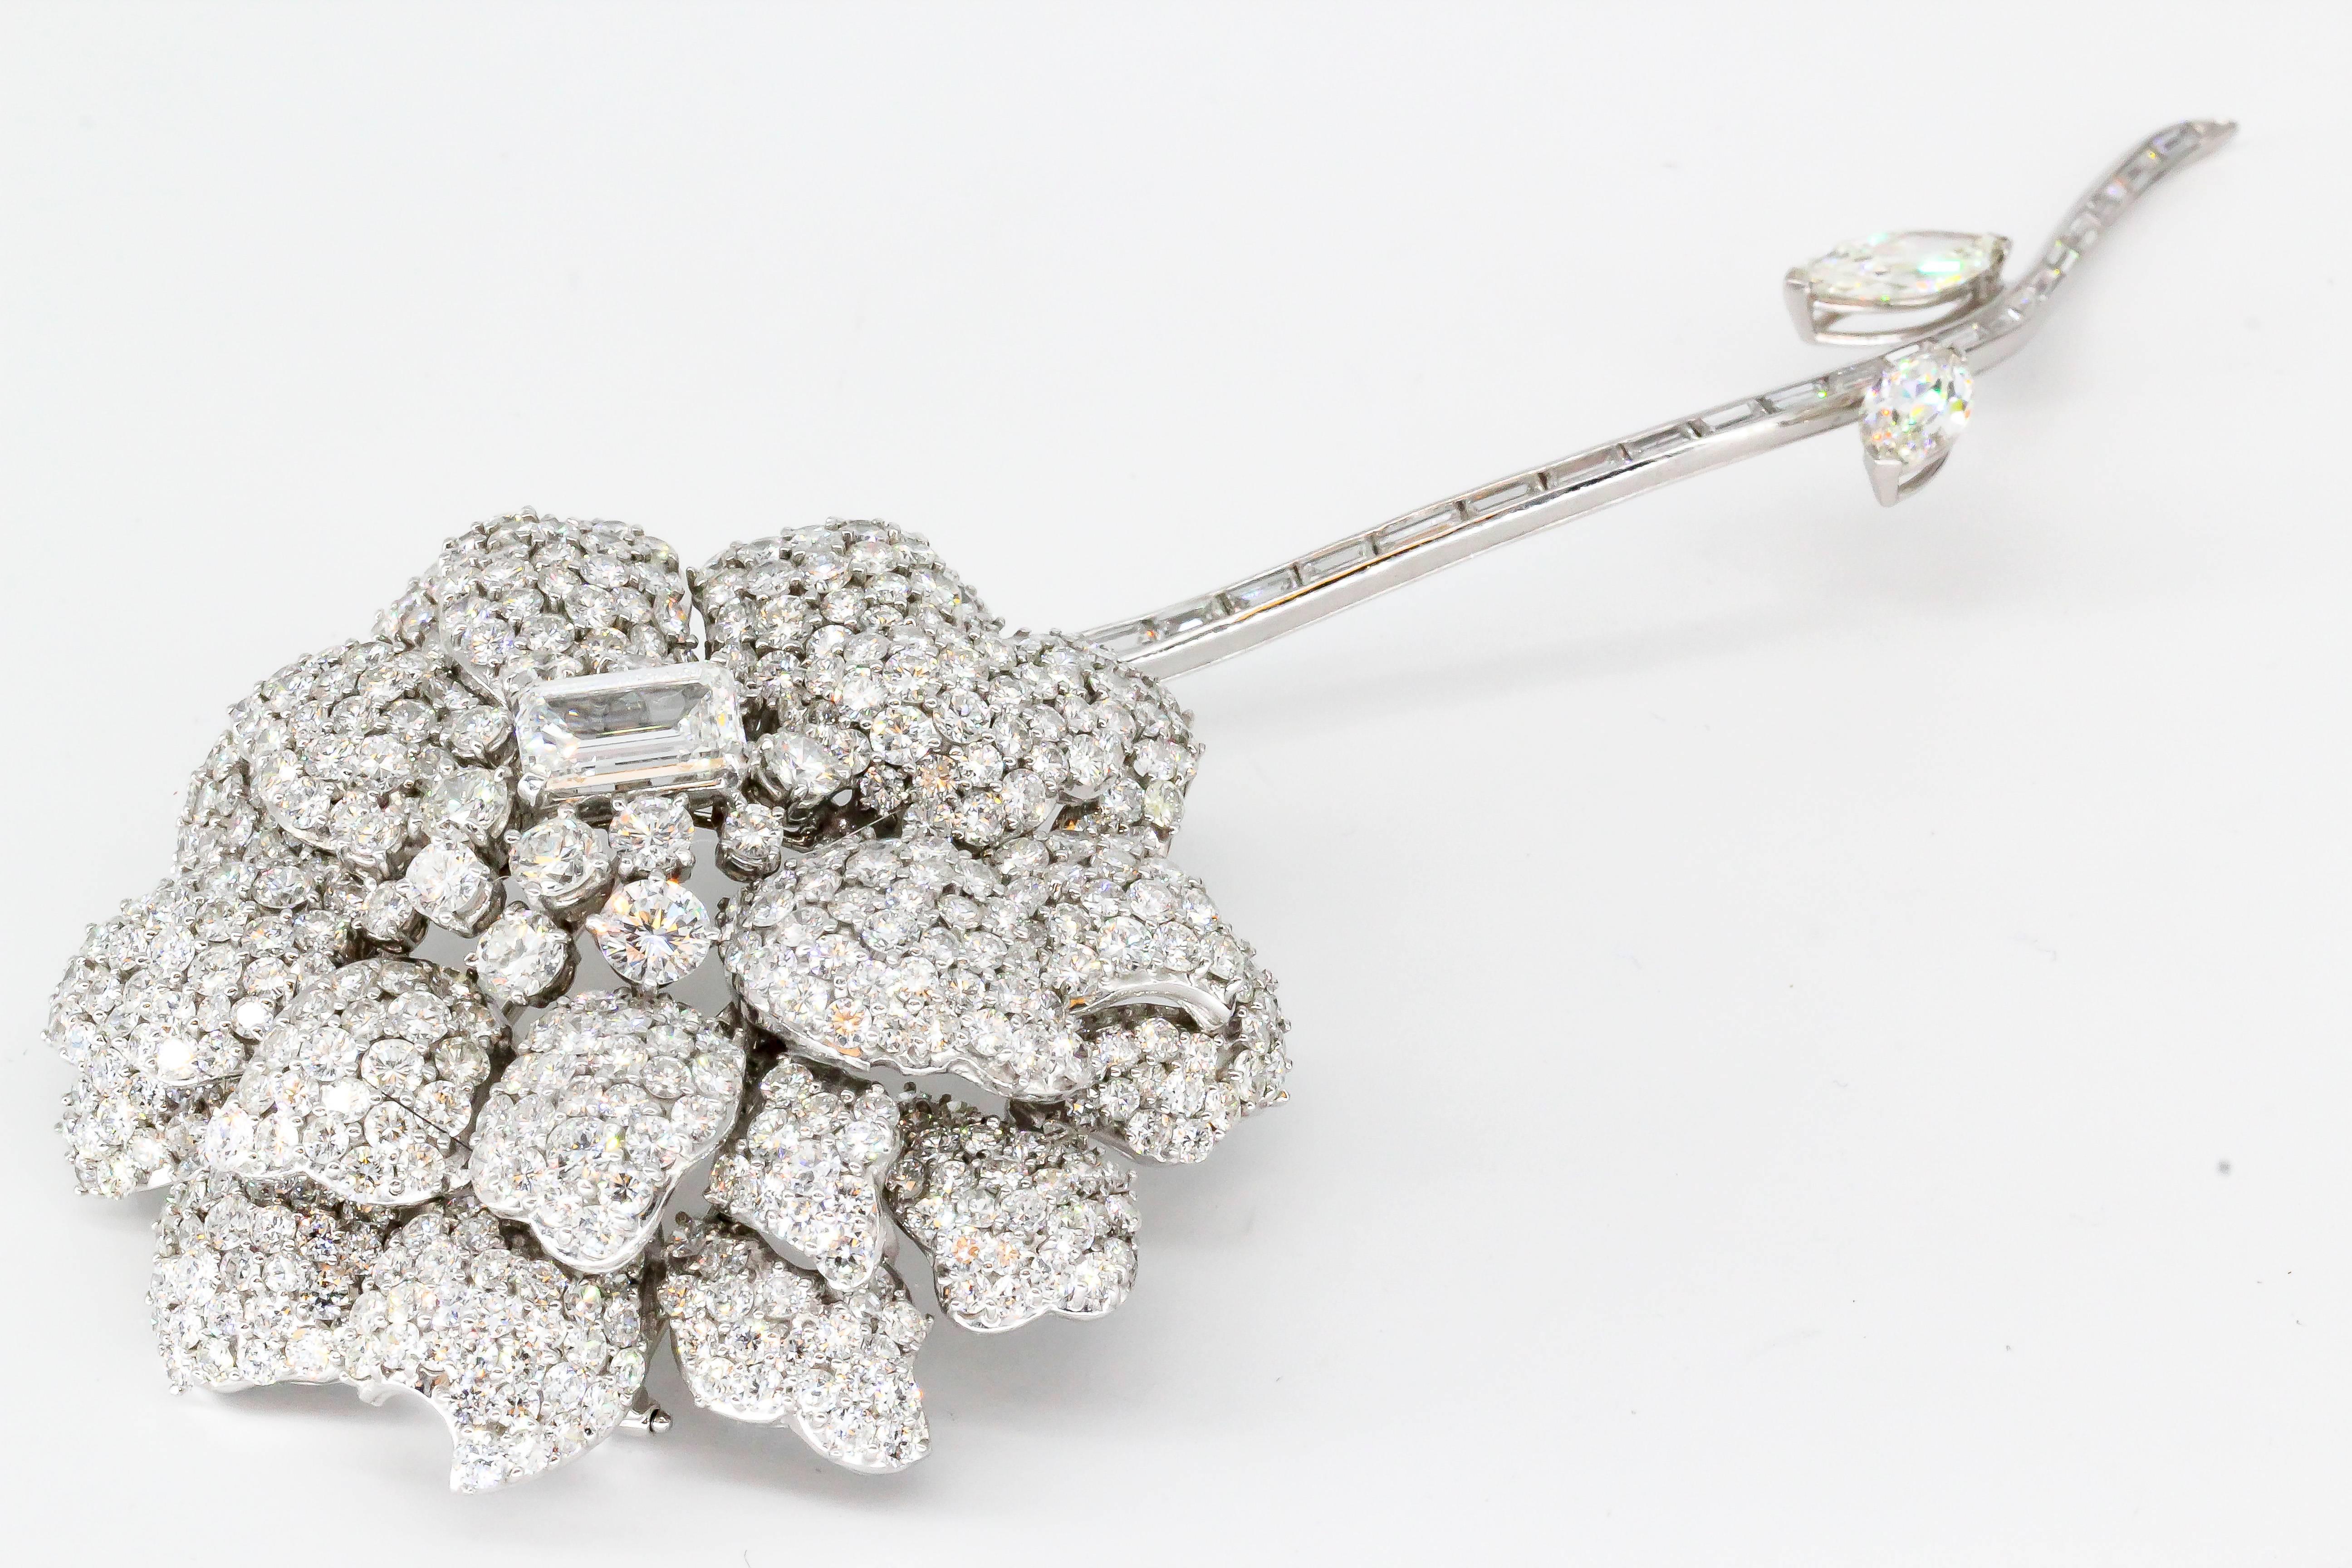 Impressive diamond and 18K white gold flower brooch with separating stem. It features approx. 40cts of high grade round brilliant cut diamonds, with approx 2.5cts emerald cut diamond as the center stone. The stem has baguette cut and marquise cut